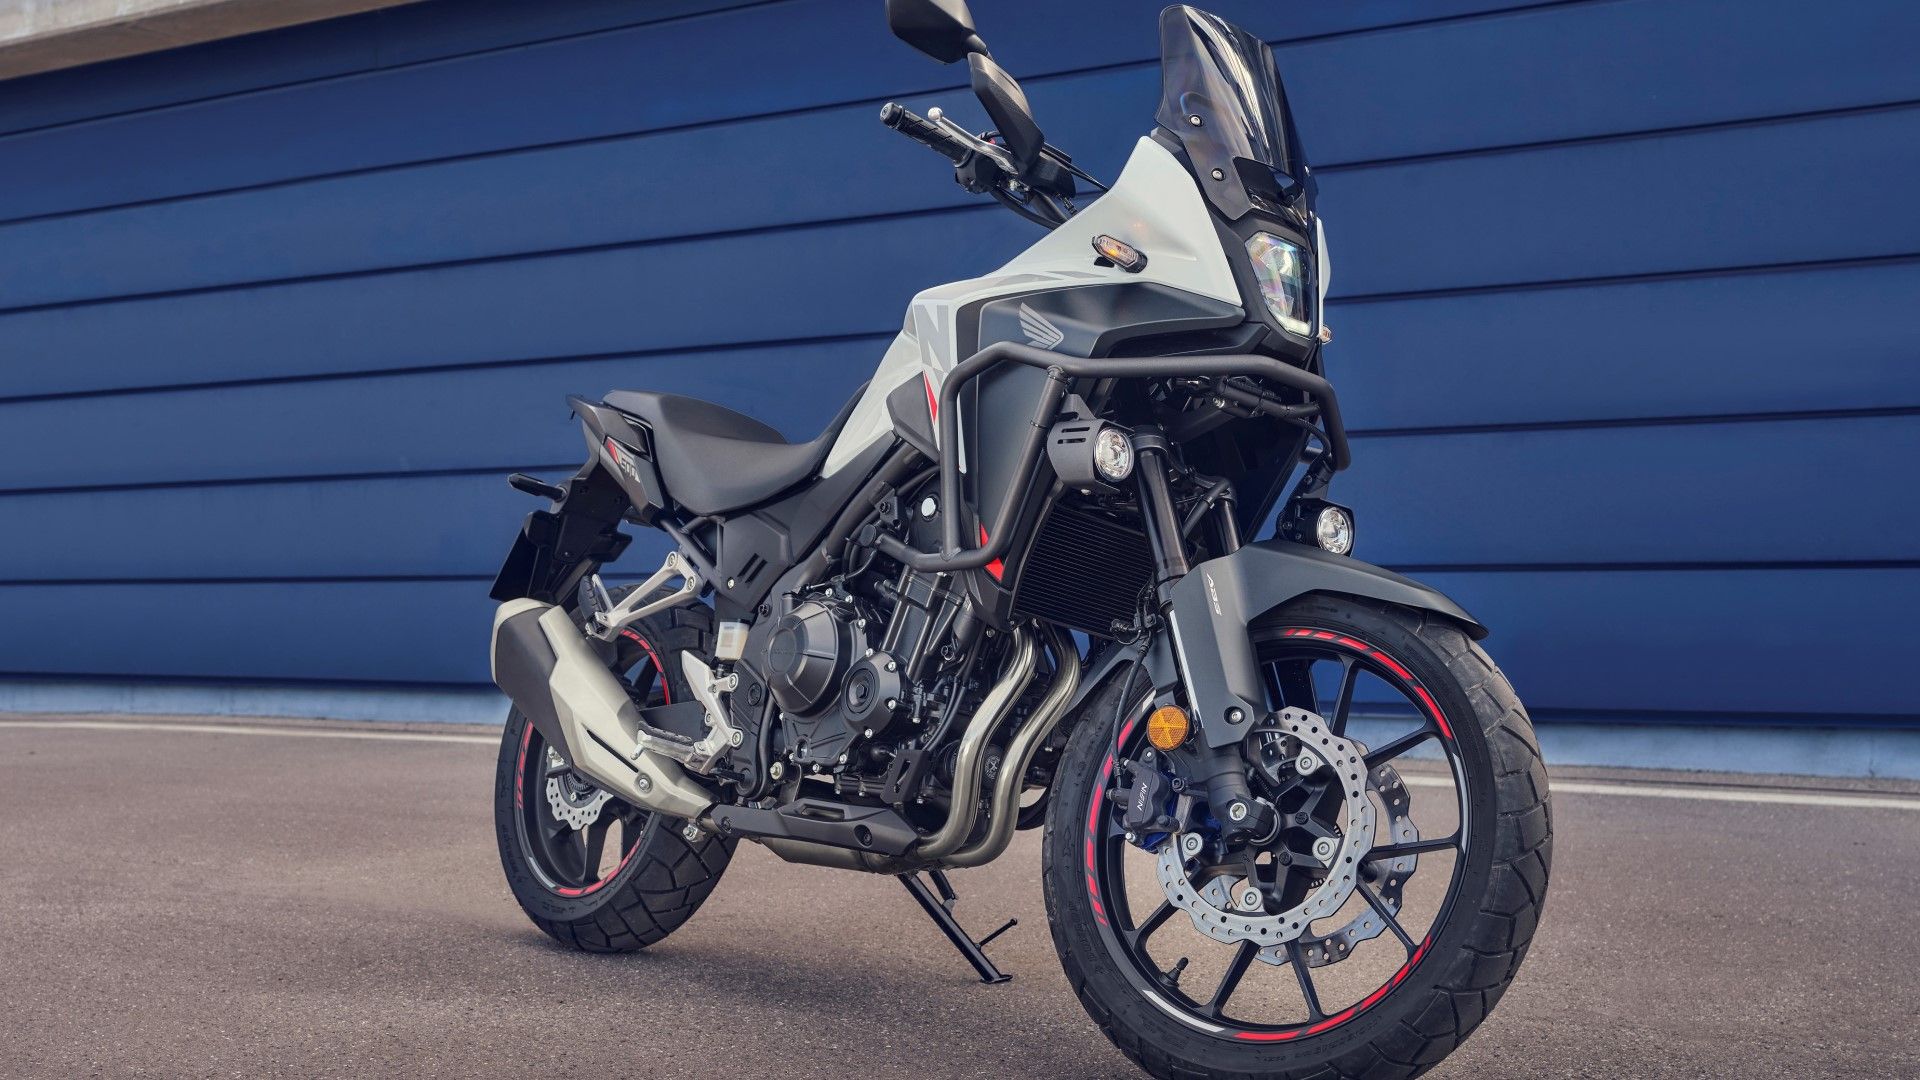 Honda CB500X Review: Long-Term Ownership Experience and Insights 